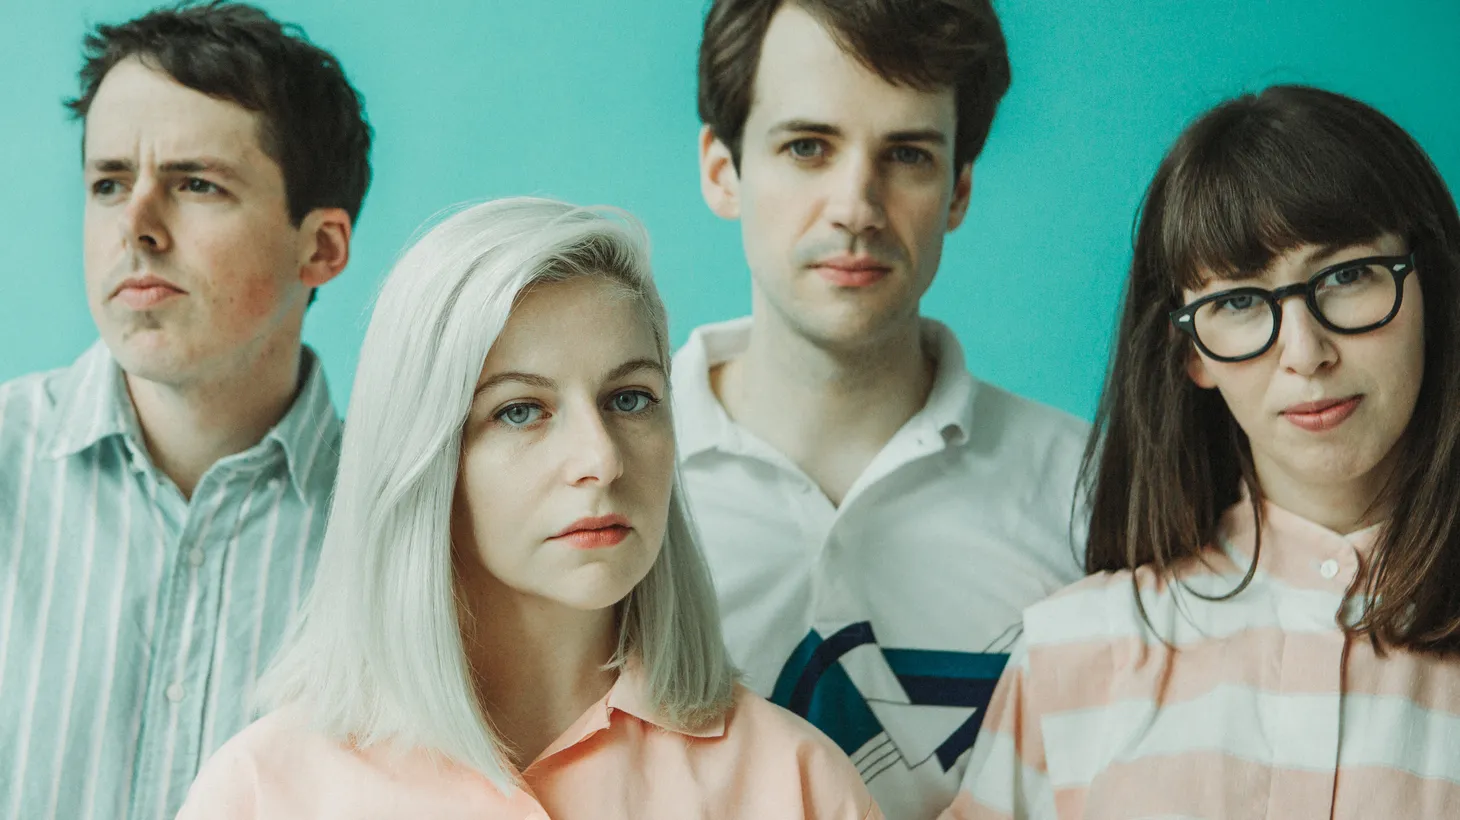 After garnering a lot of buzz and building a devoted fan base, Canadian indie pop band Alvvays really hit its stride on its sophomore album.